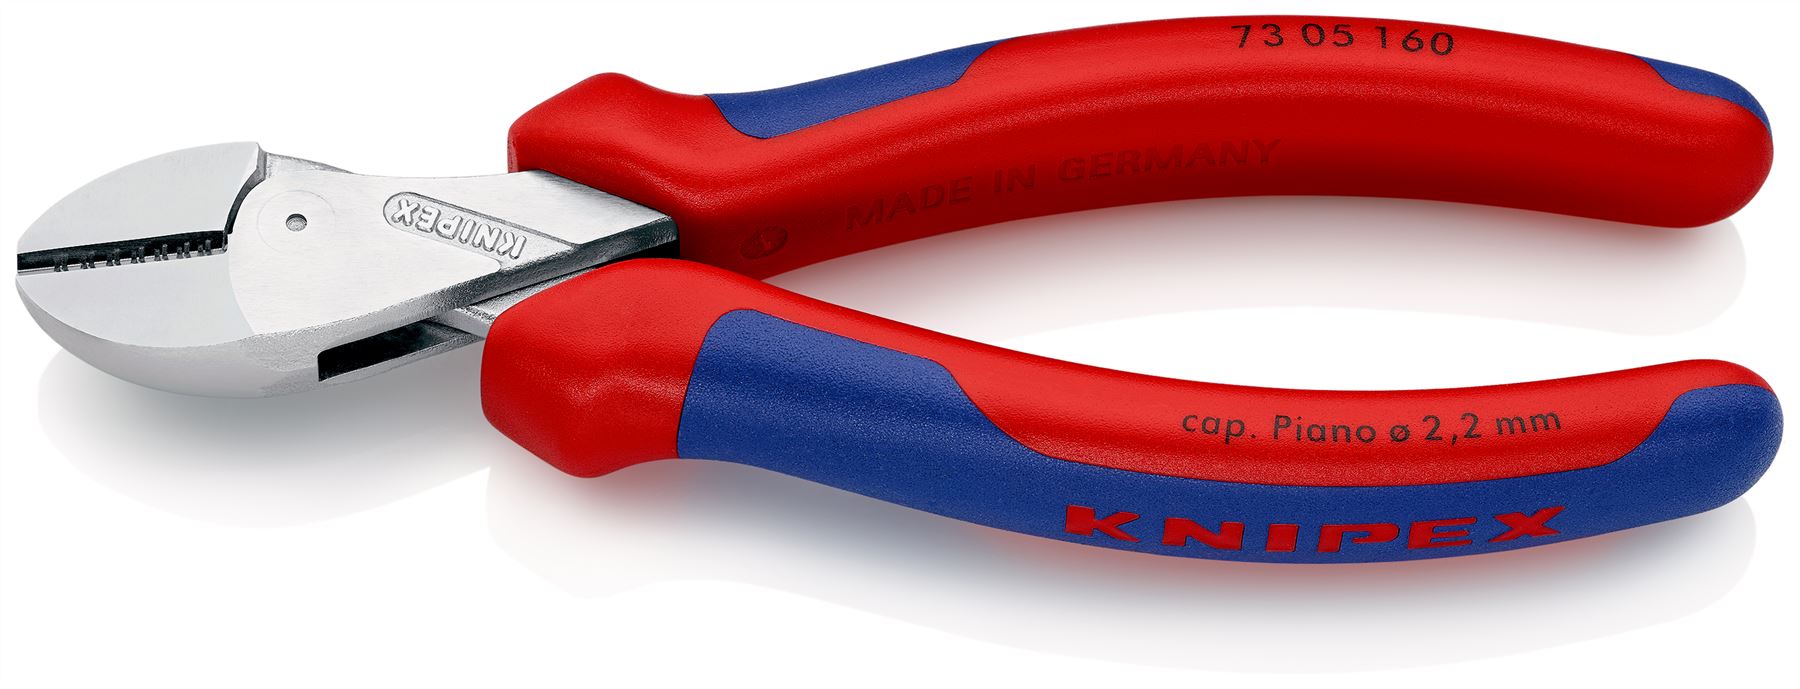 Knipex X-Cut Diagonal Side Cutting Pliers 160mm Multi Component Grips Chrome Plated 73 05 160